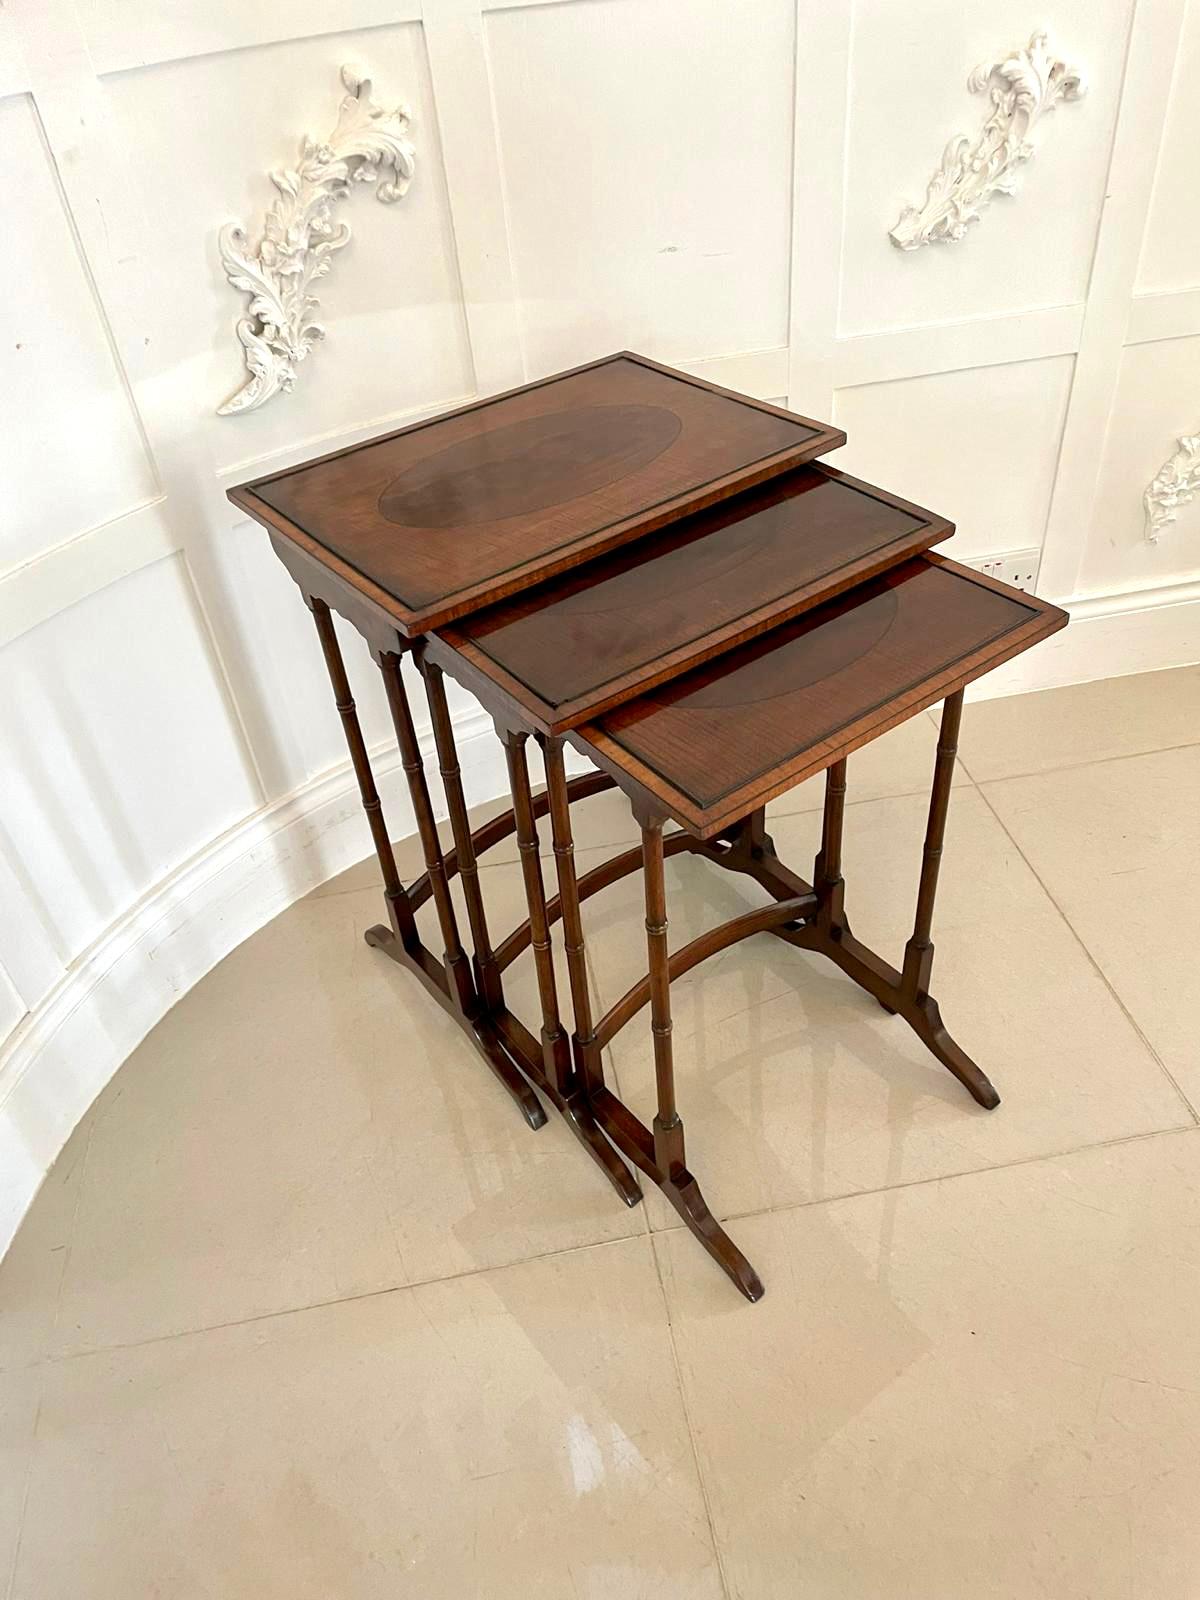 Antique Edwardian quality mahogany nest of 3 tables having quality fiddleback mahogany crossbanded tops with figured mahogany oval inlaid centres supported by fine turned mahogany columns and raised on shaped feet united by shaped stretchers